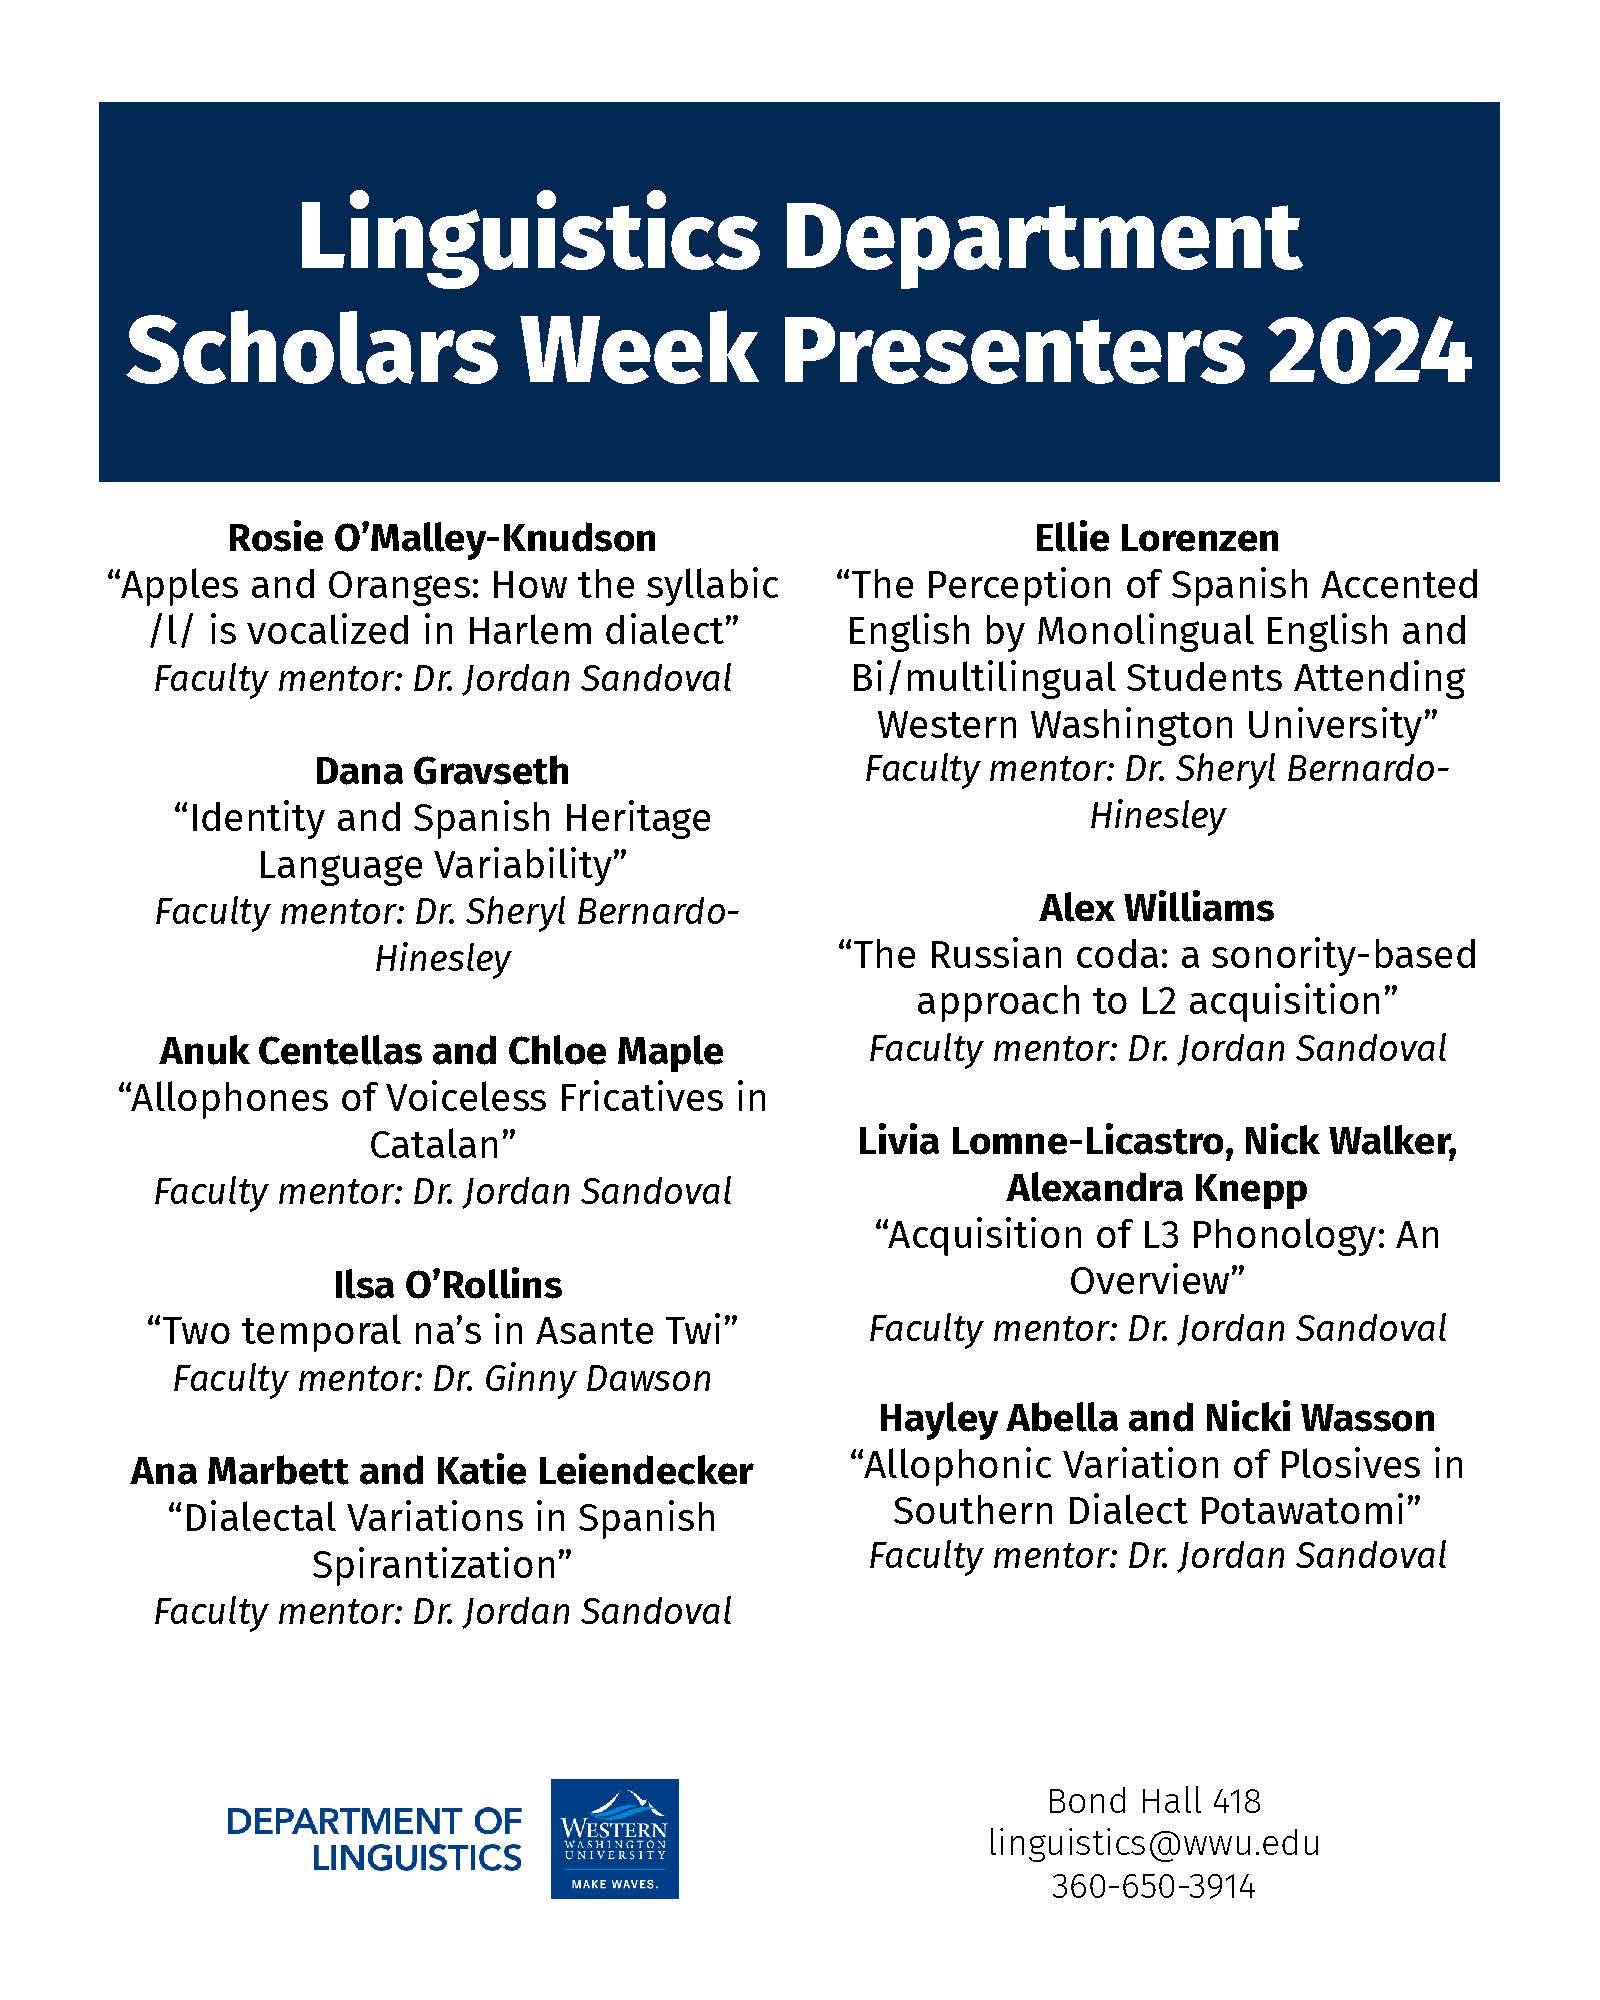 A list of all of the Linguistics Department Scholars Week presenters for 2024. Please refer to the webpage for the complete list.